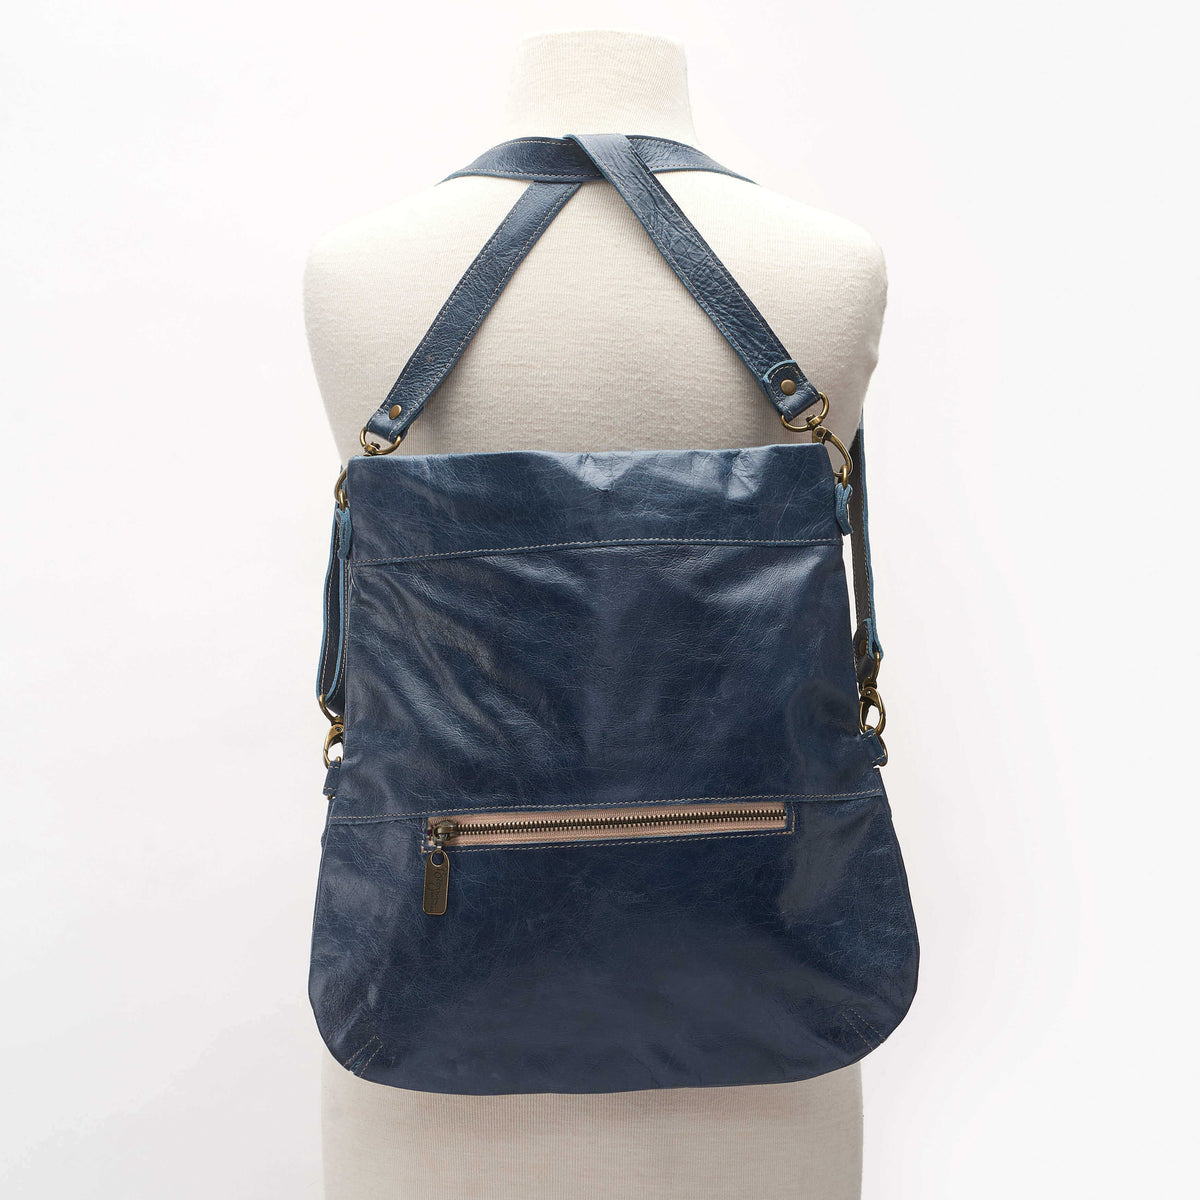 Blue distressed leather Mini Lauren Convertible Backpack Bag by Brynn Capella